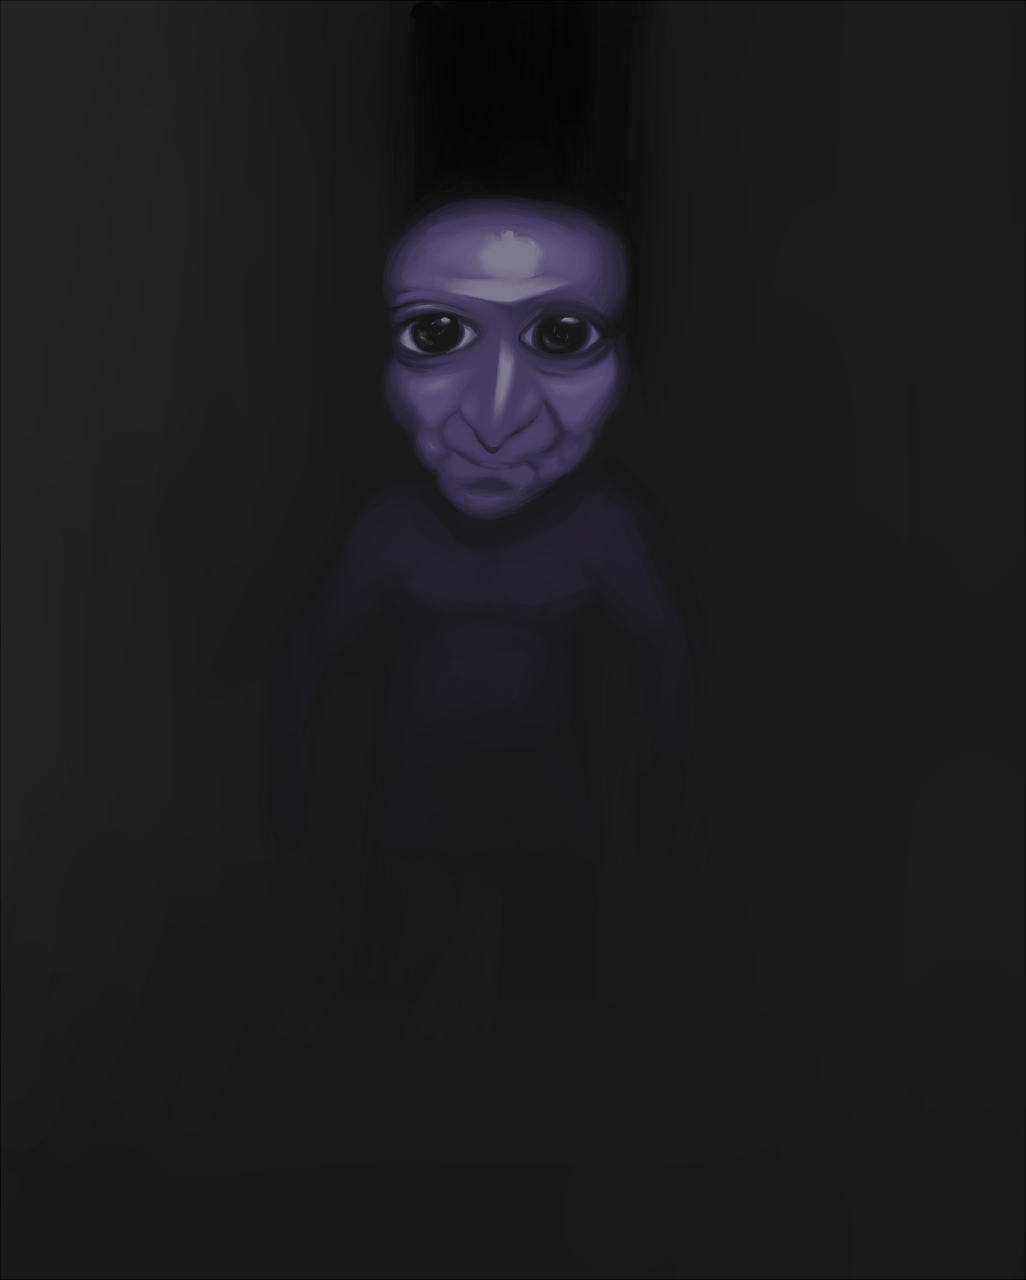 Ao Oni Online Is A Survival Royale With Only One Survivor - Siliconera